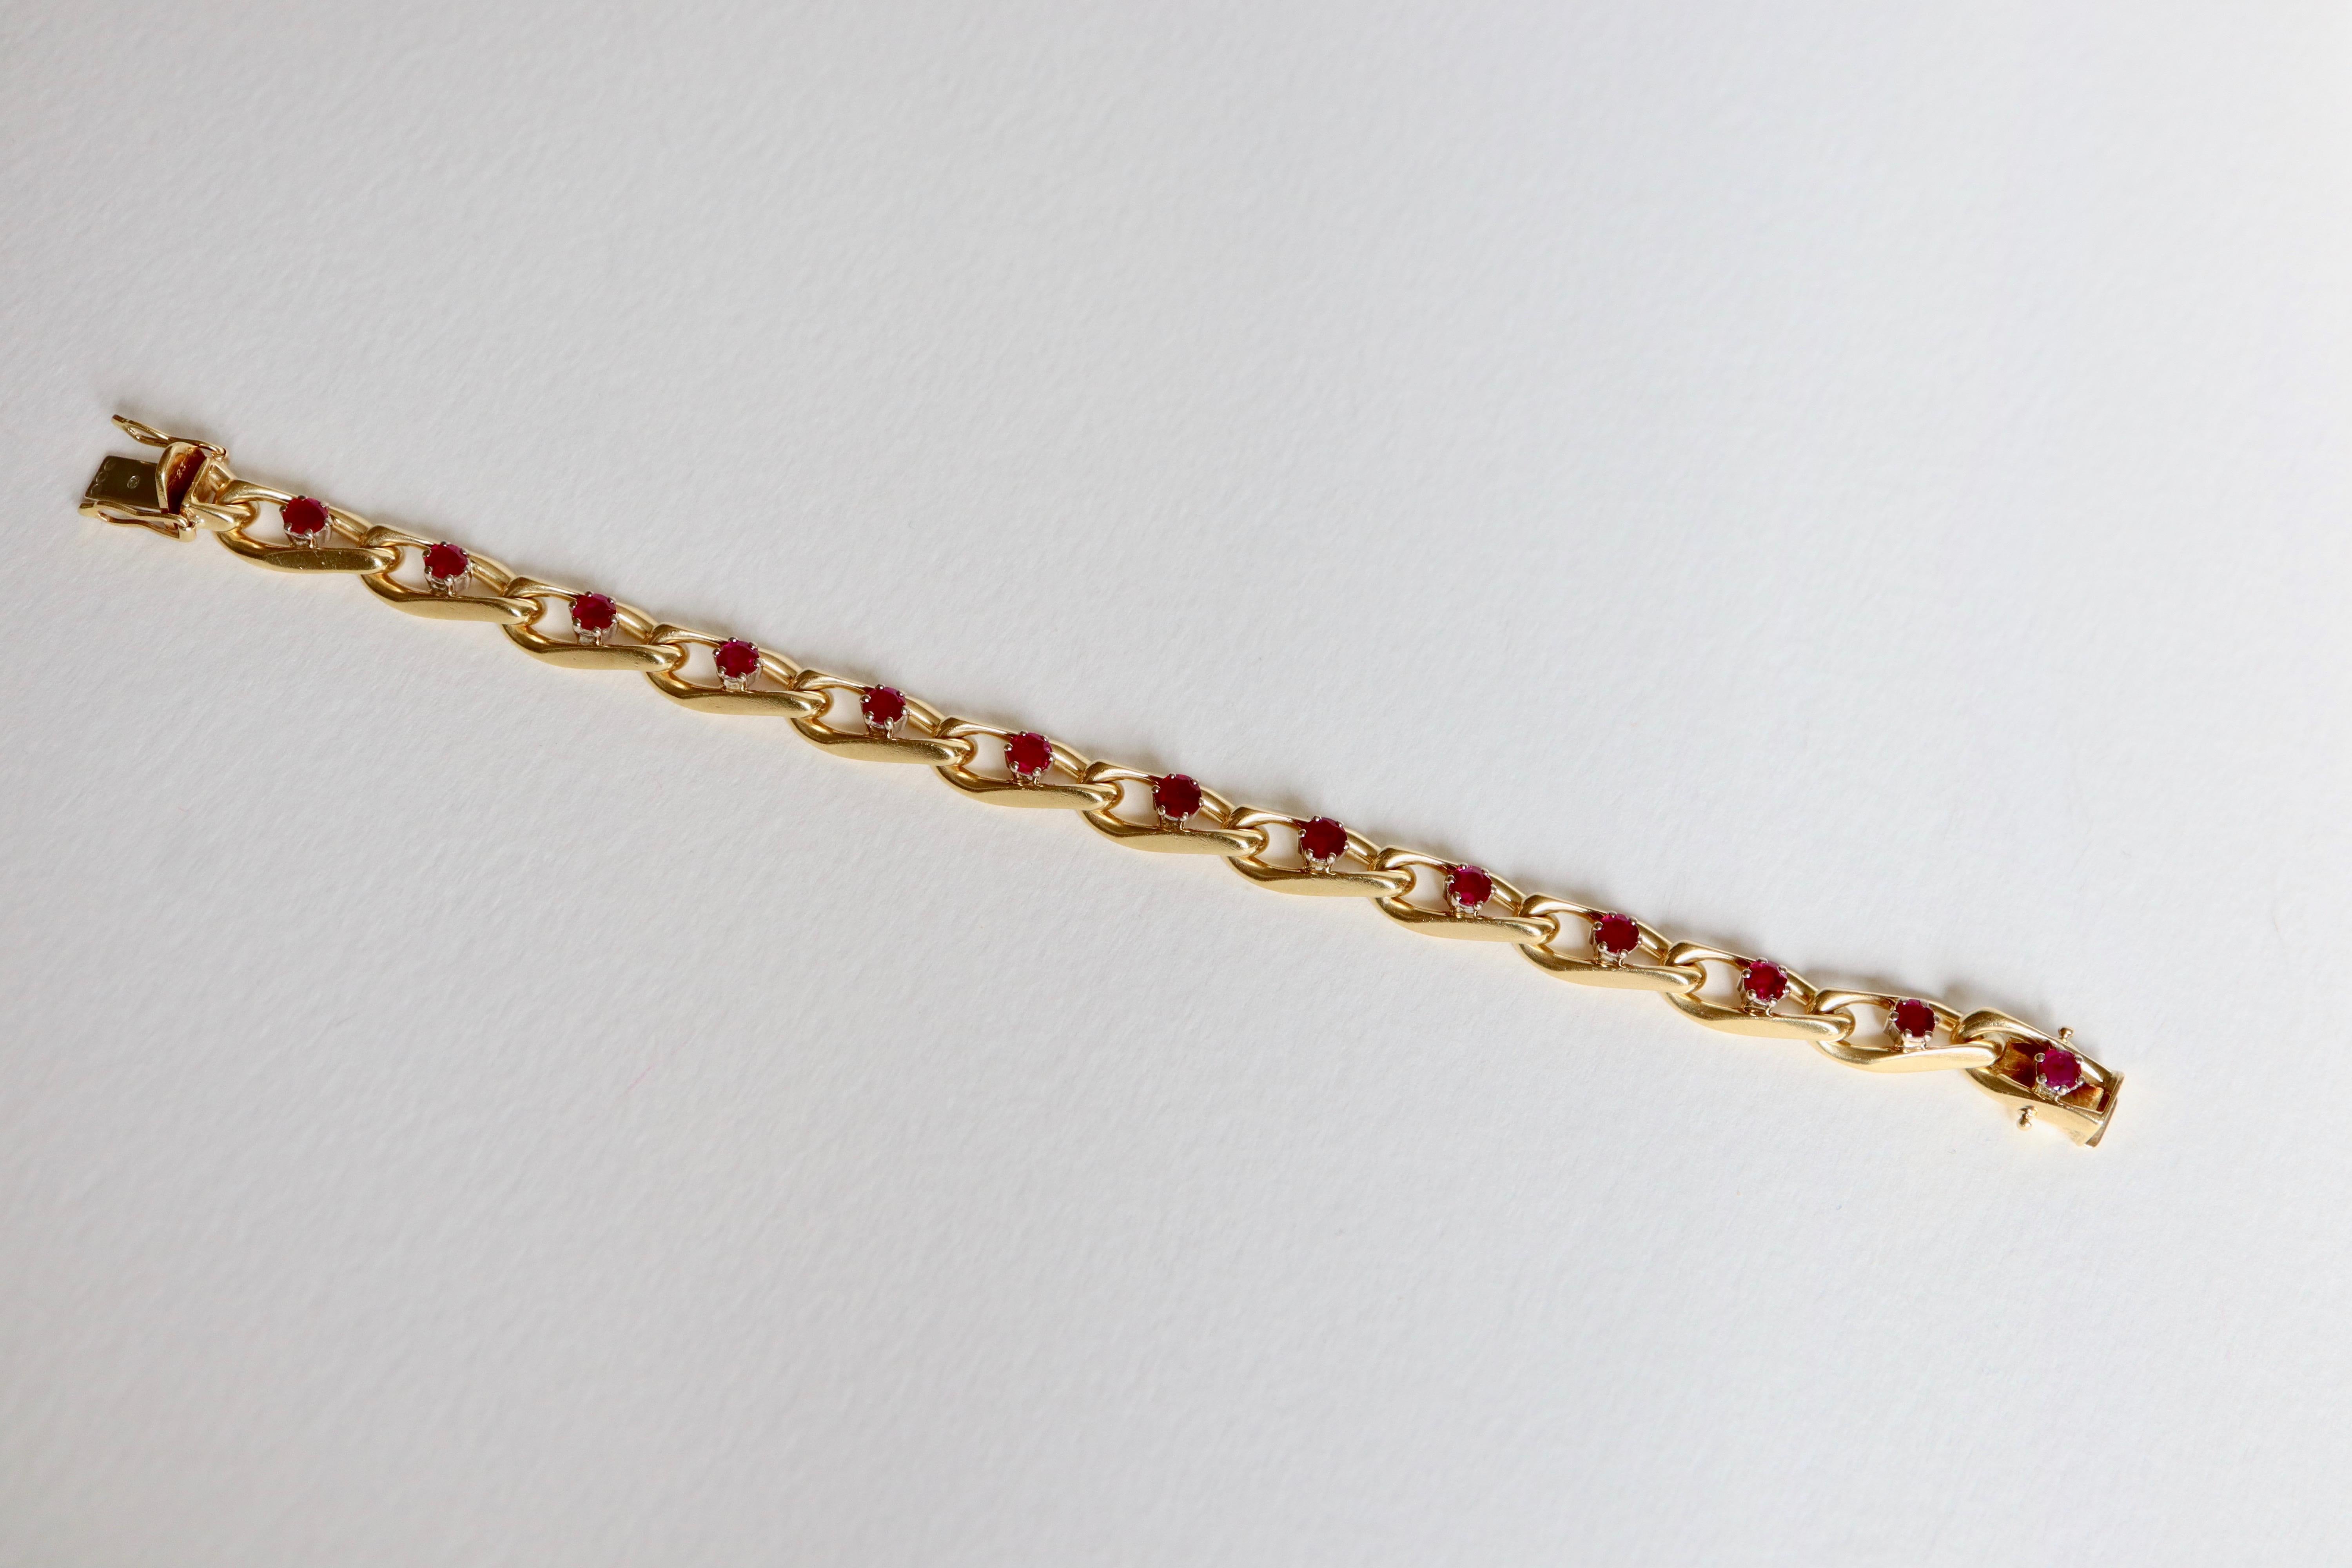 CHAUMET Bracelet in 18 Carat yellow Gold and 13 Ruby Jewels in the Center of each Link set with a Claw. 
Signed CHAUMET and numbered 7068C. Tab Clasp with Eight Security.
Gross weight: 31.9 g Length: 18 cm Width: 0.8 cm